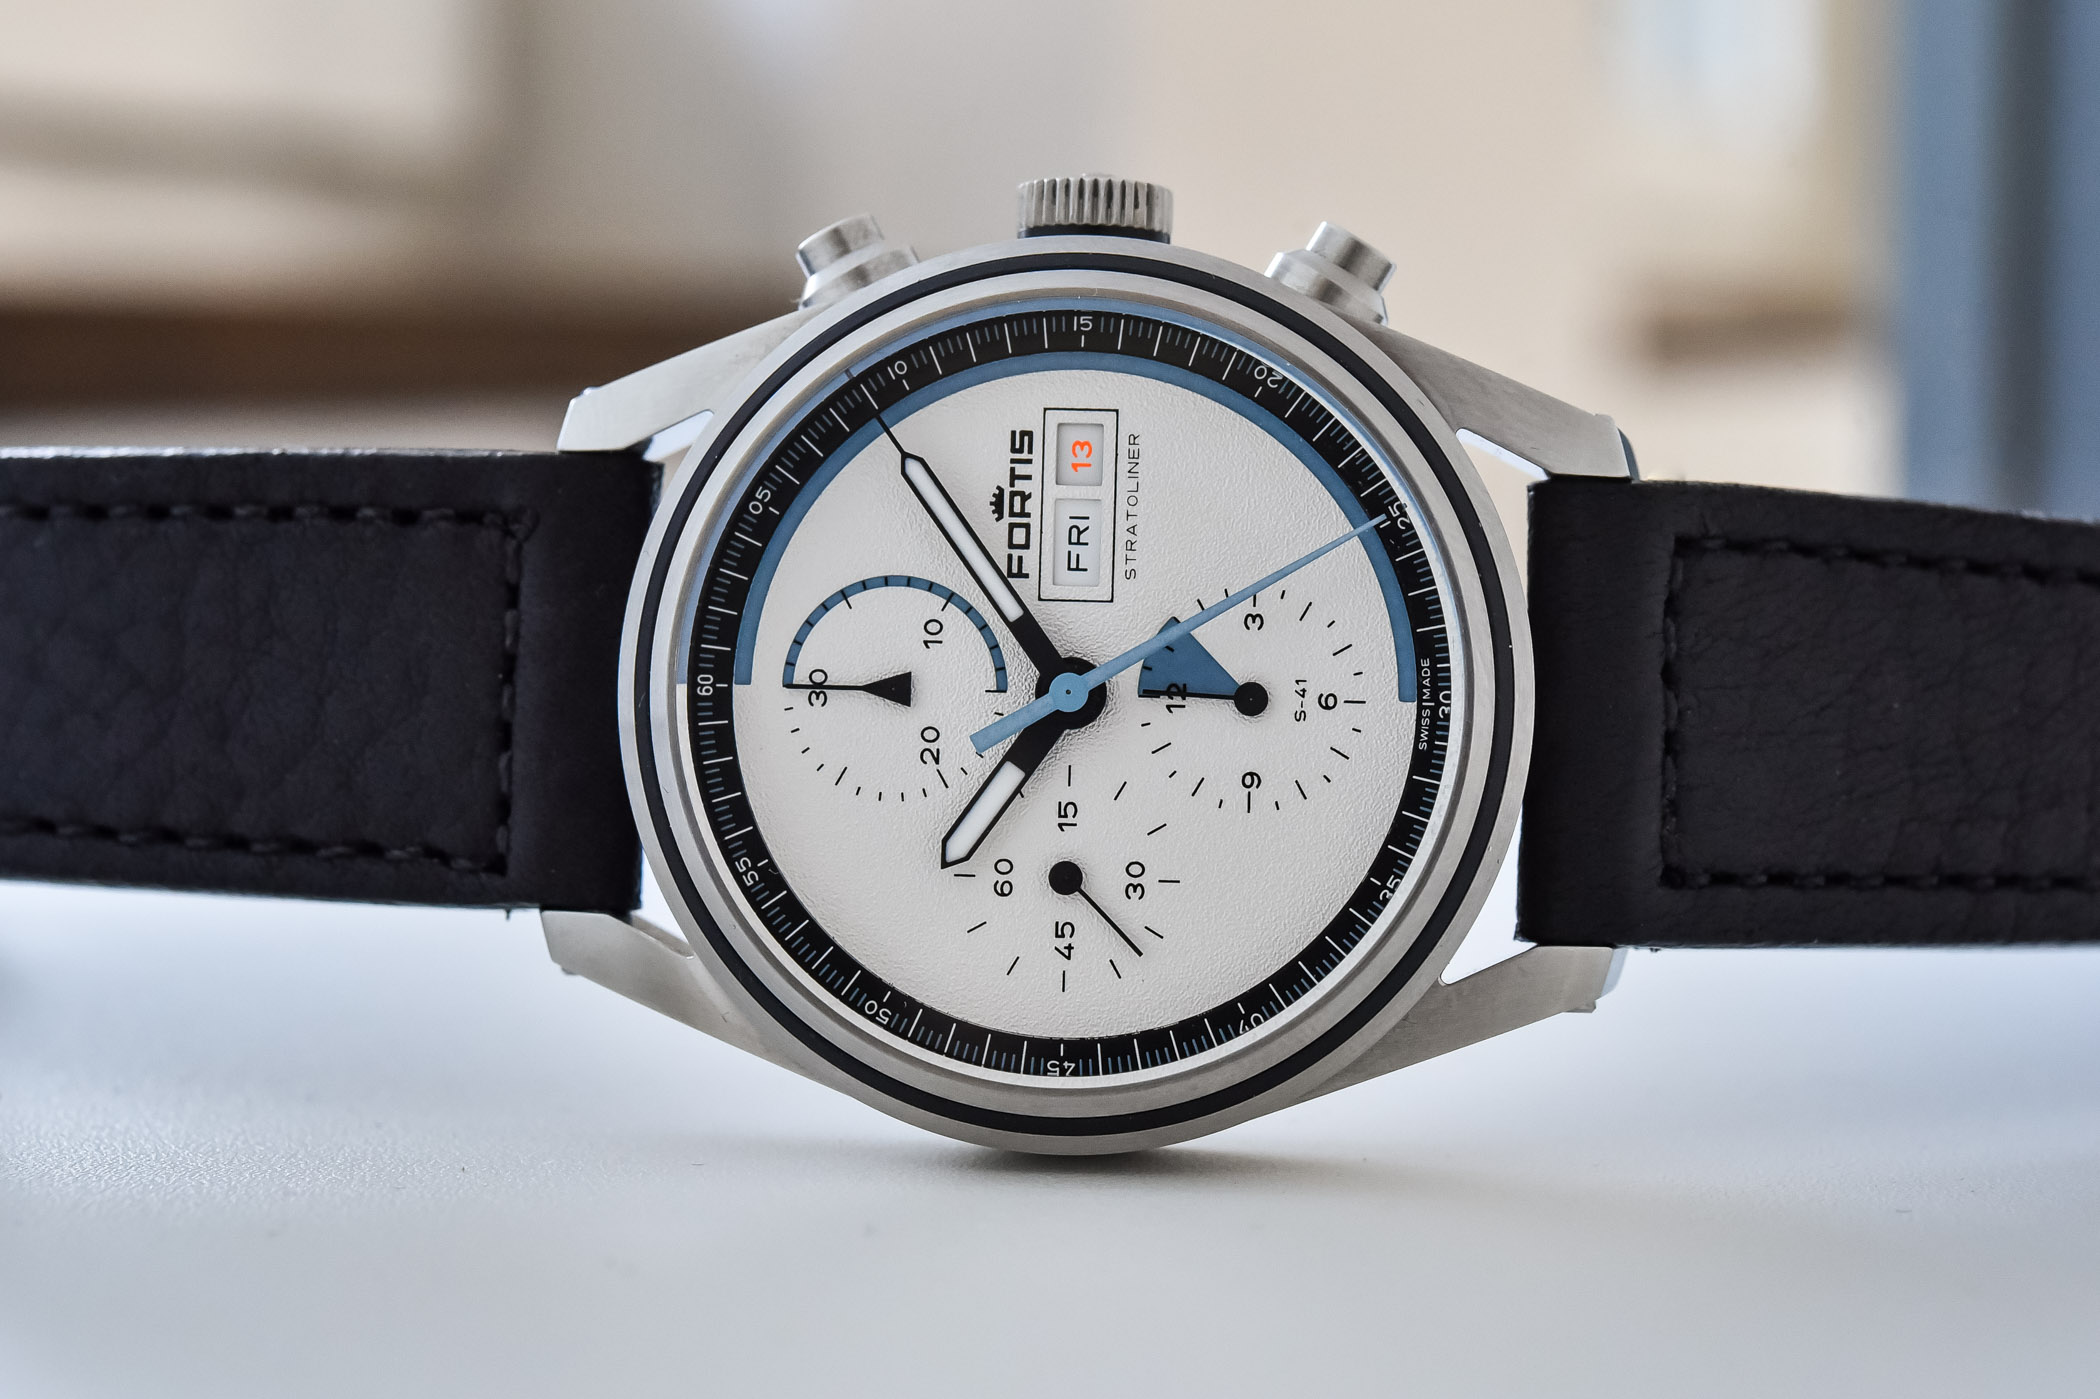 Fortis Stratoliner Space Watch Chronograph